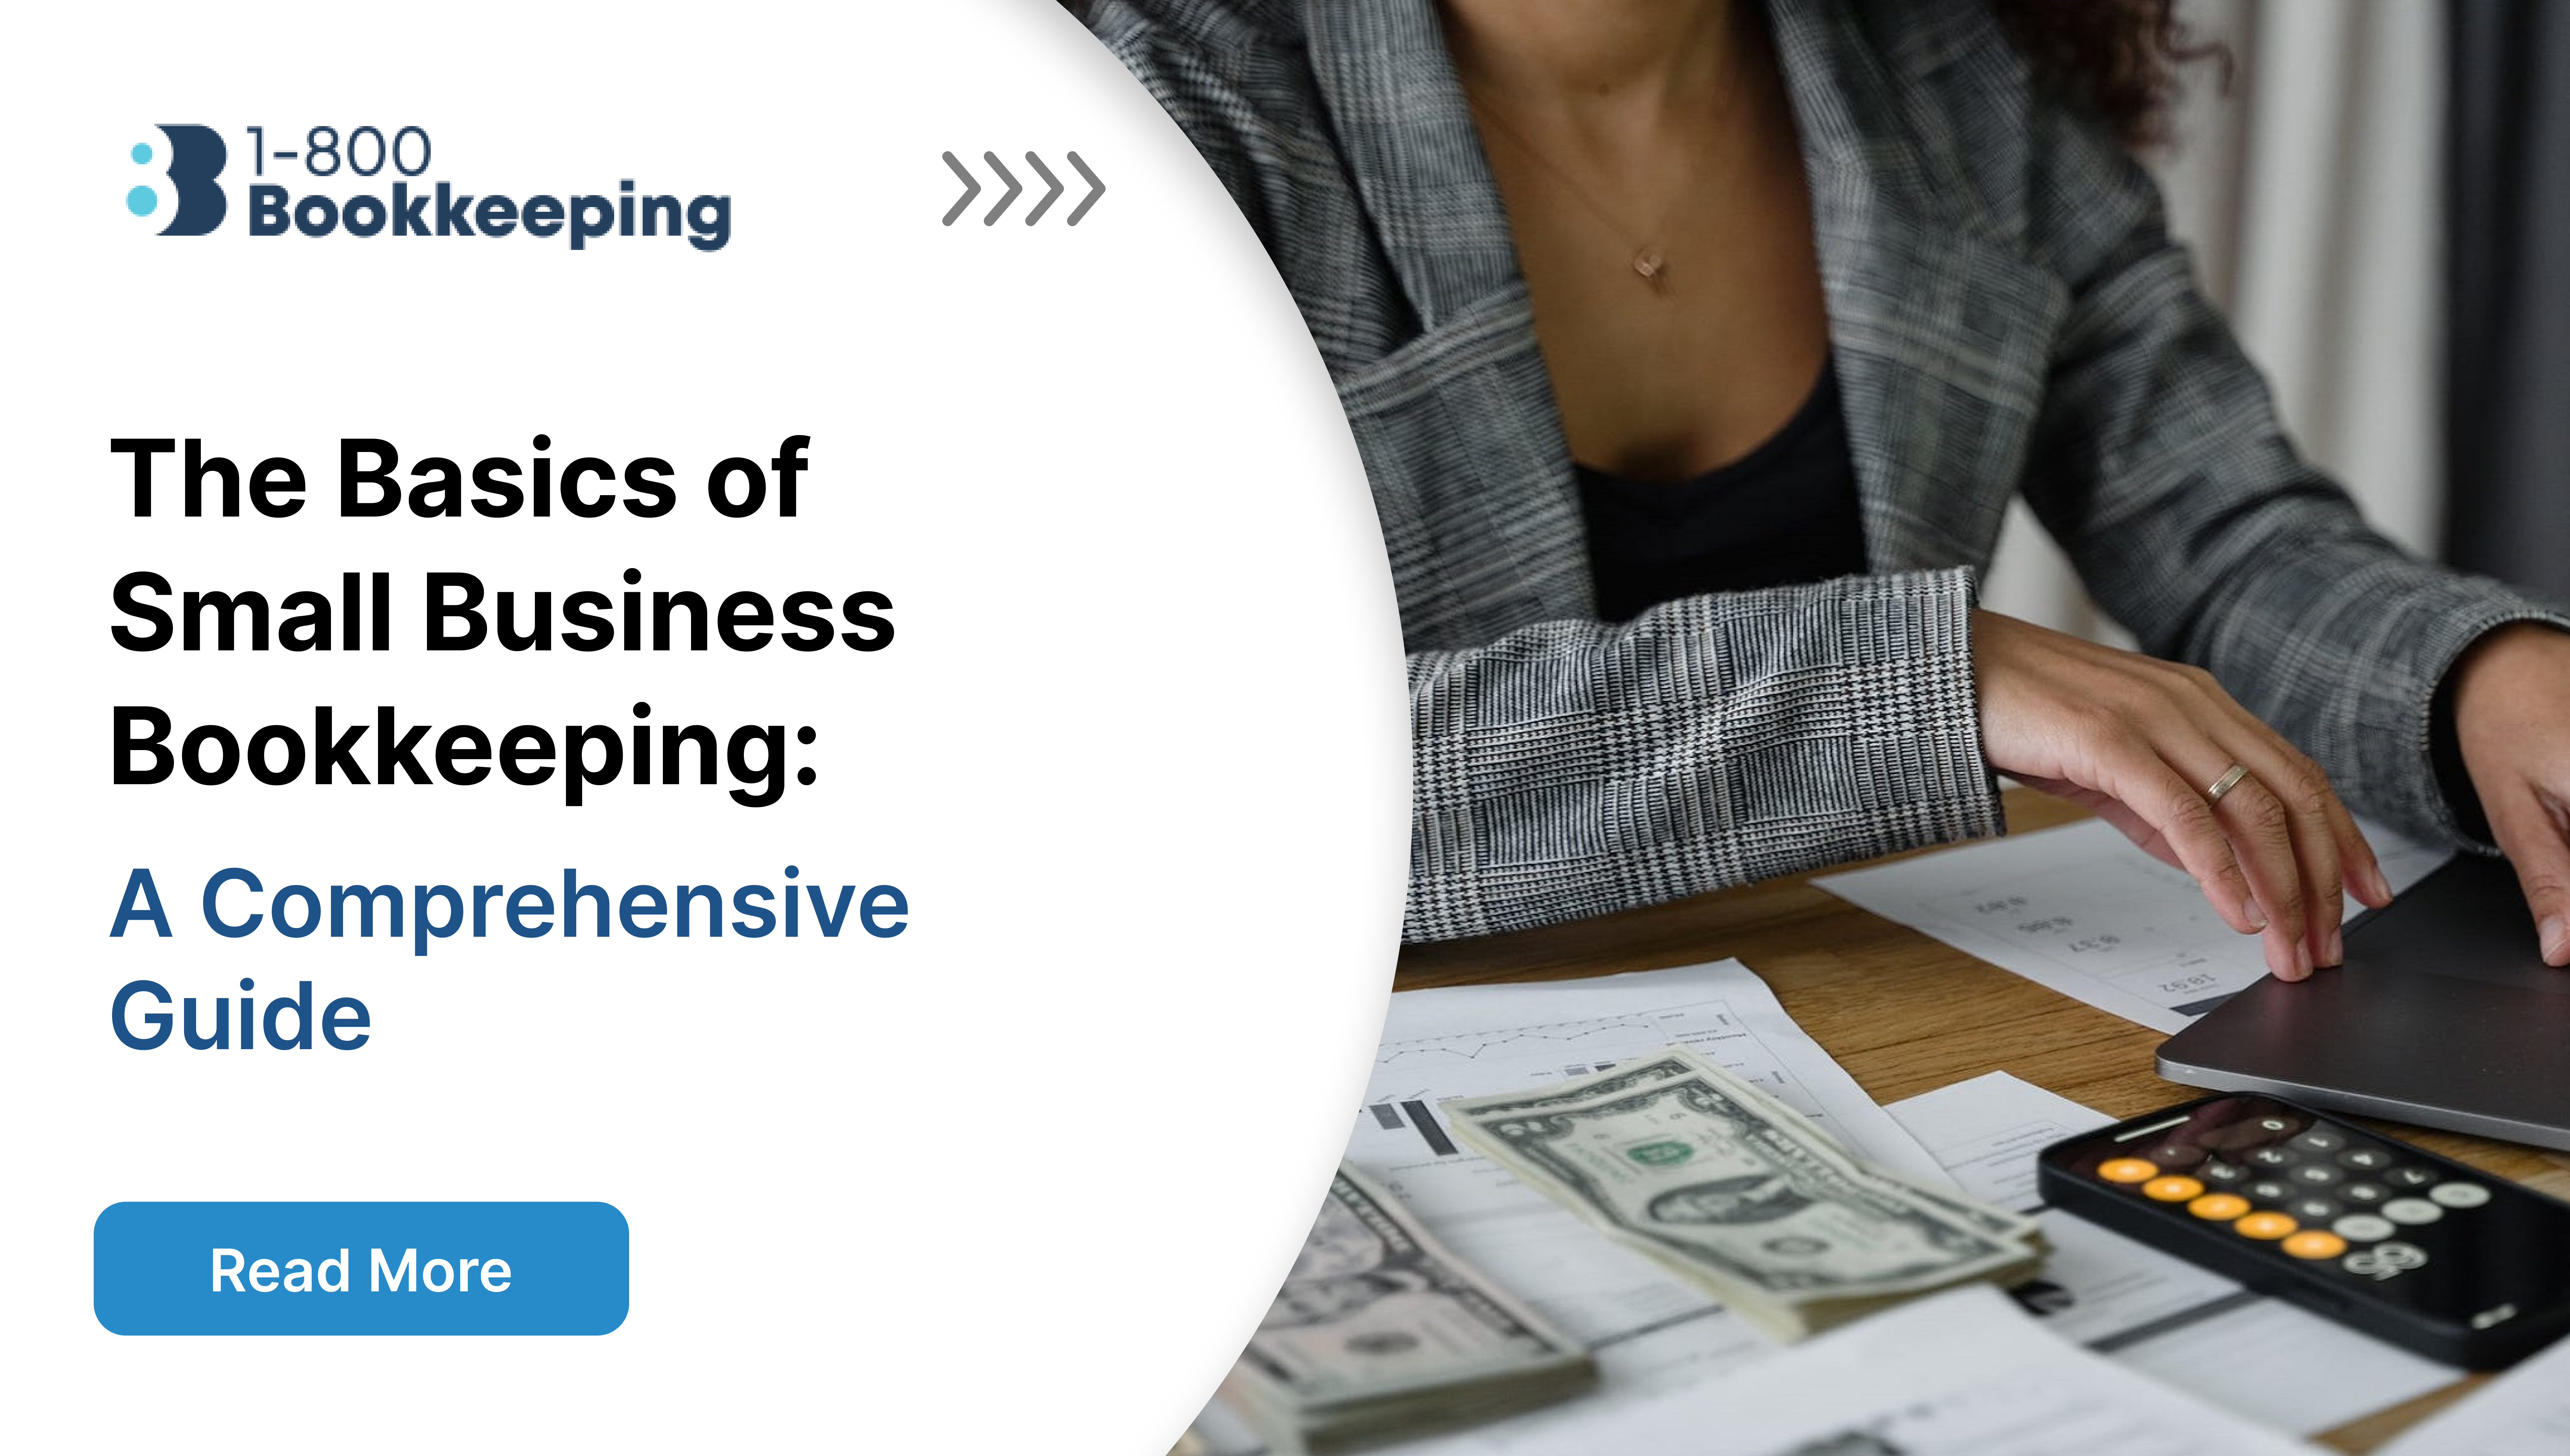 The Basics of Small Business Bookkeeping: A Comprehensive Guide